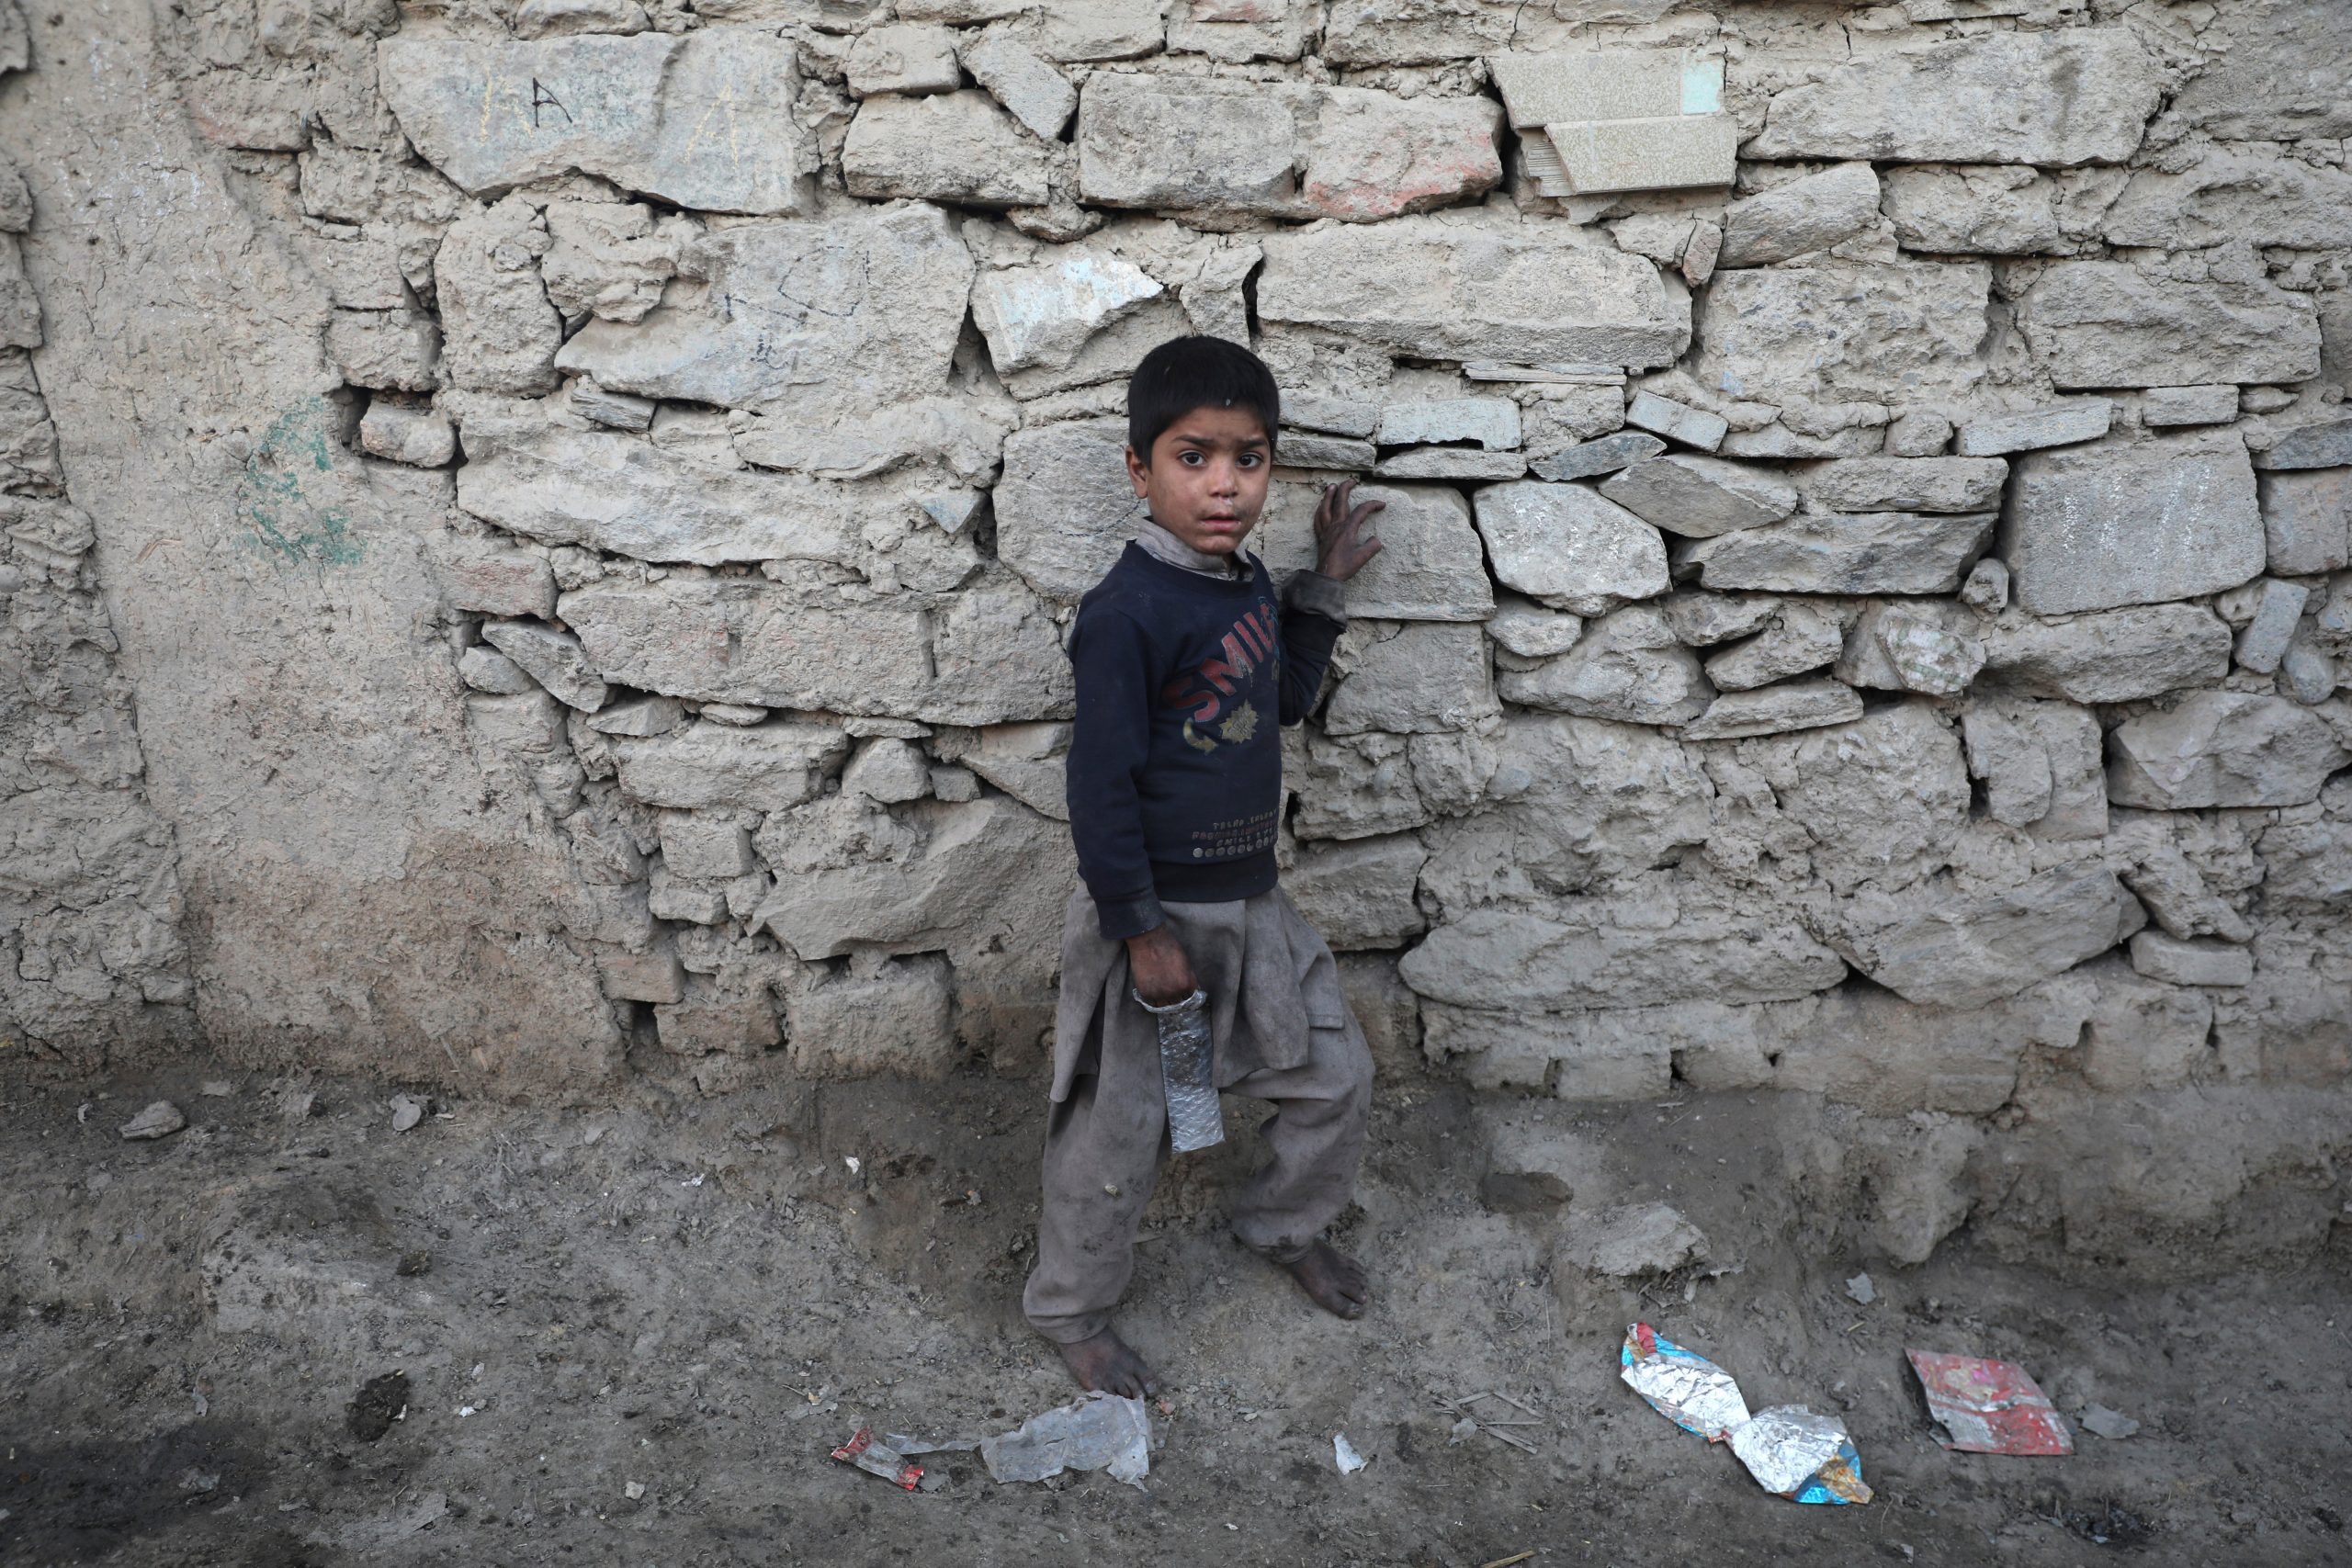 Report: Harsh winter can bring illness, death to Afghan kids